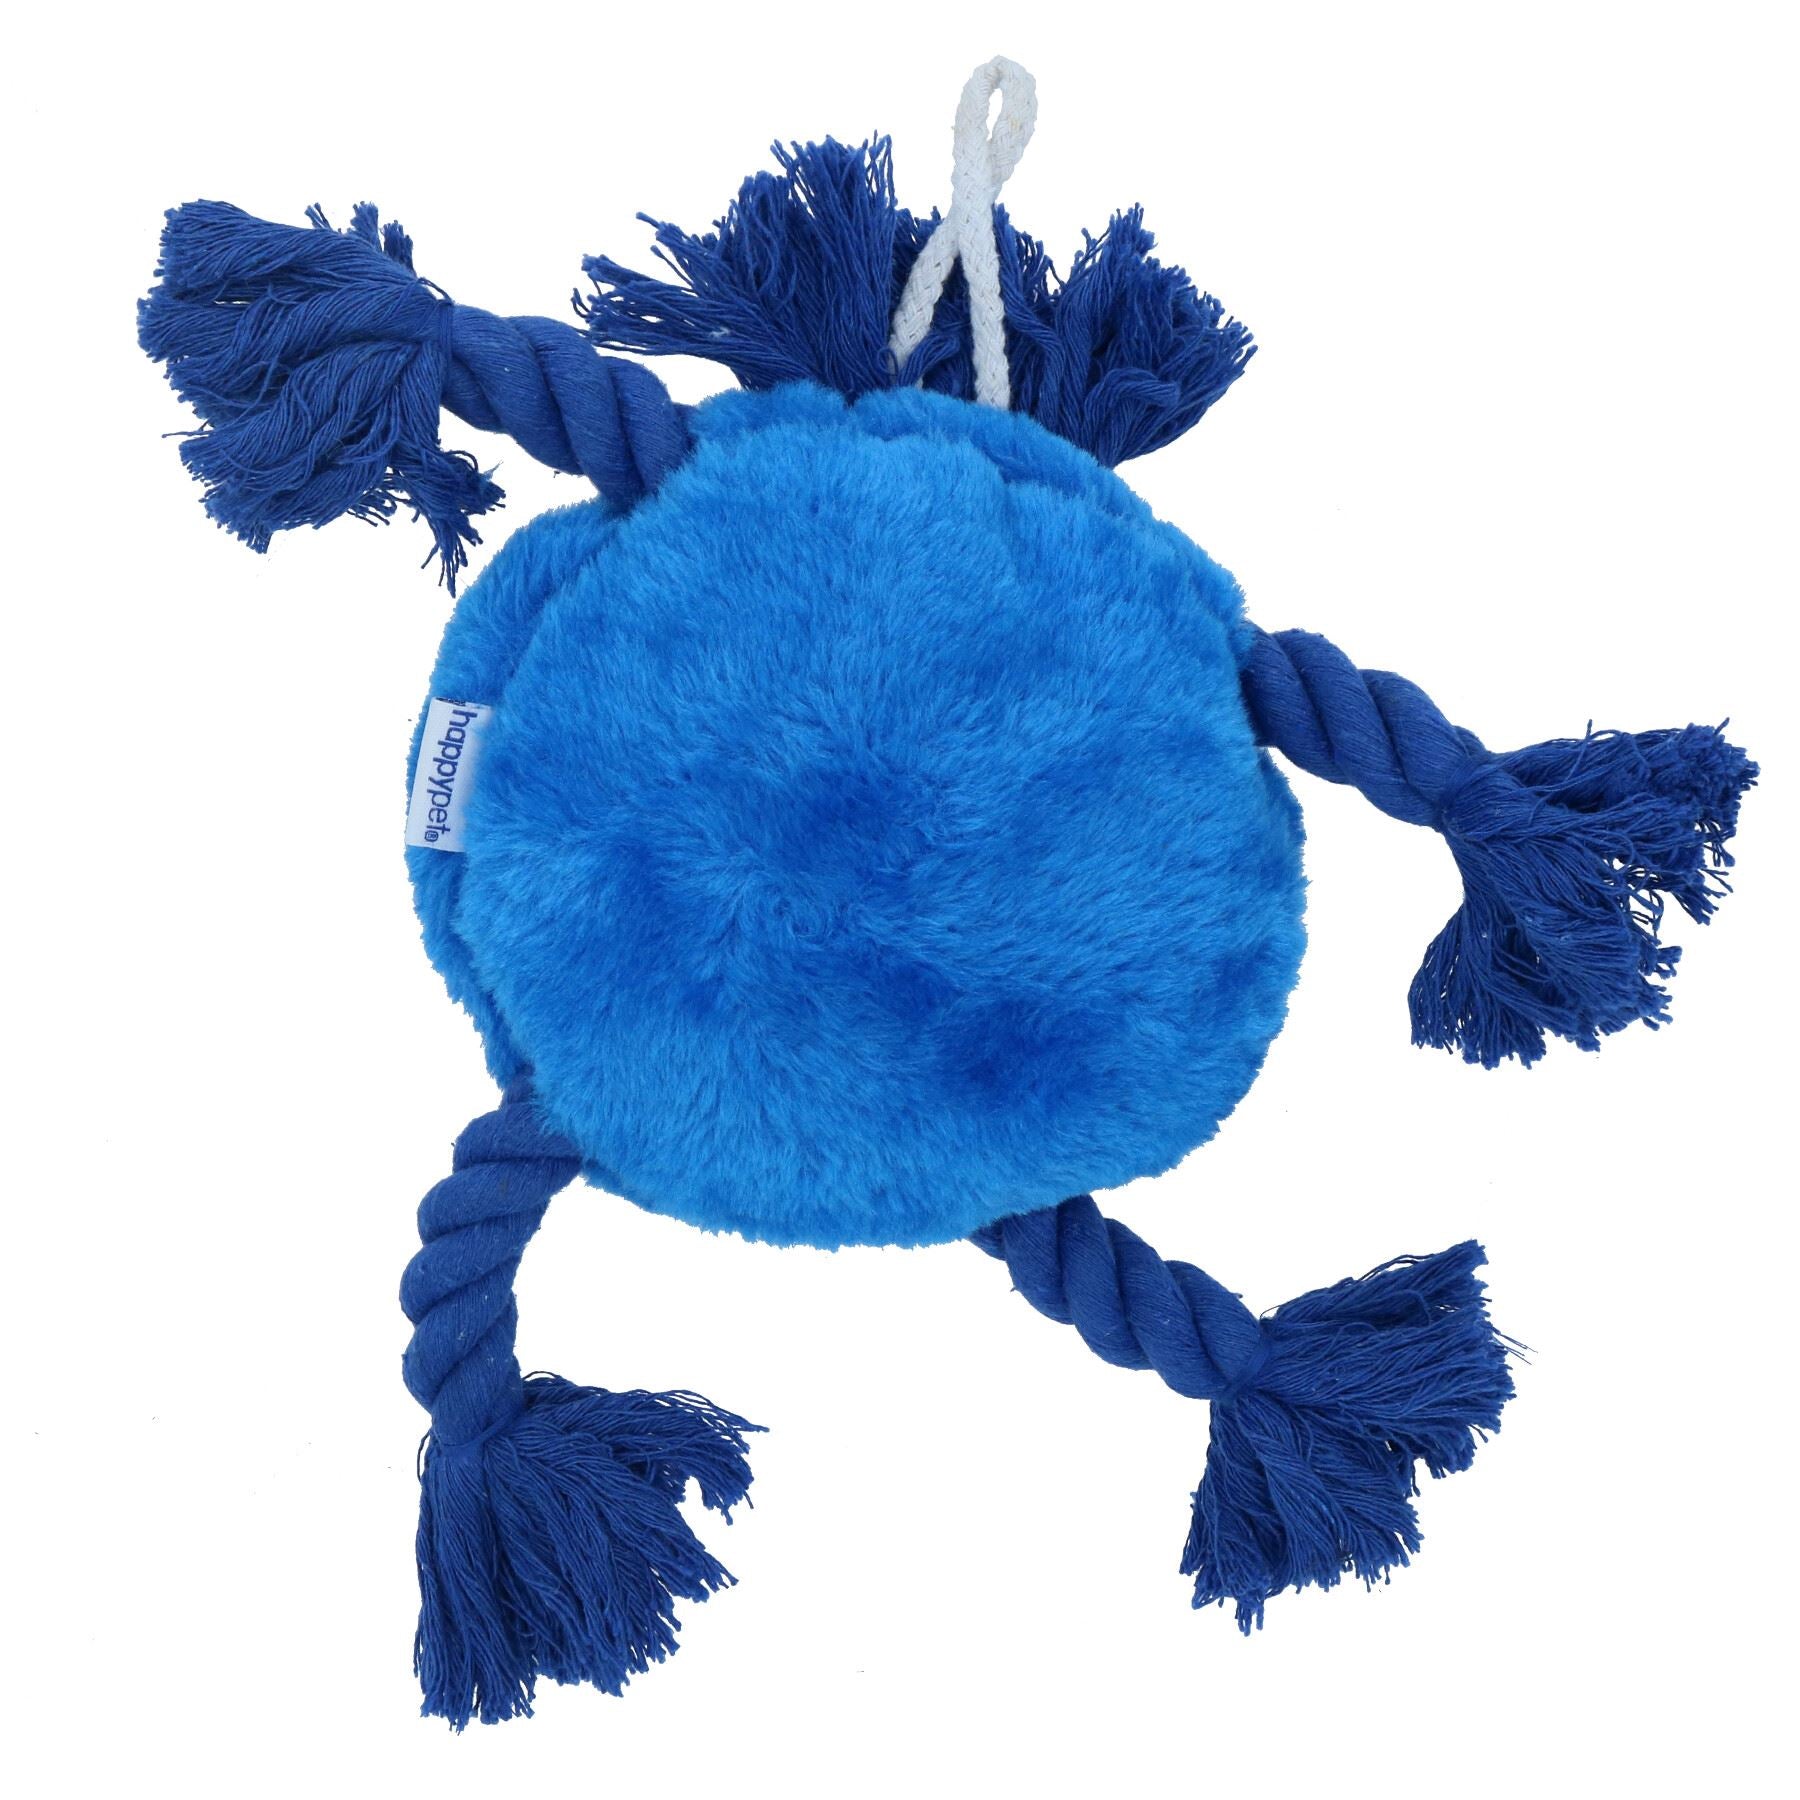 Plush Soft Blue Happy Face Dog Play Toy With Squeak & Rope Arms.